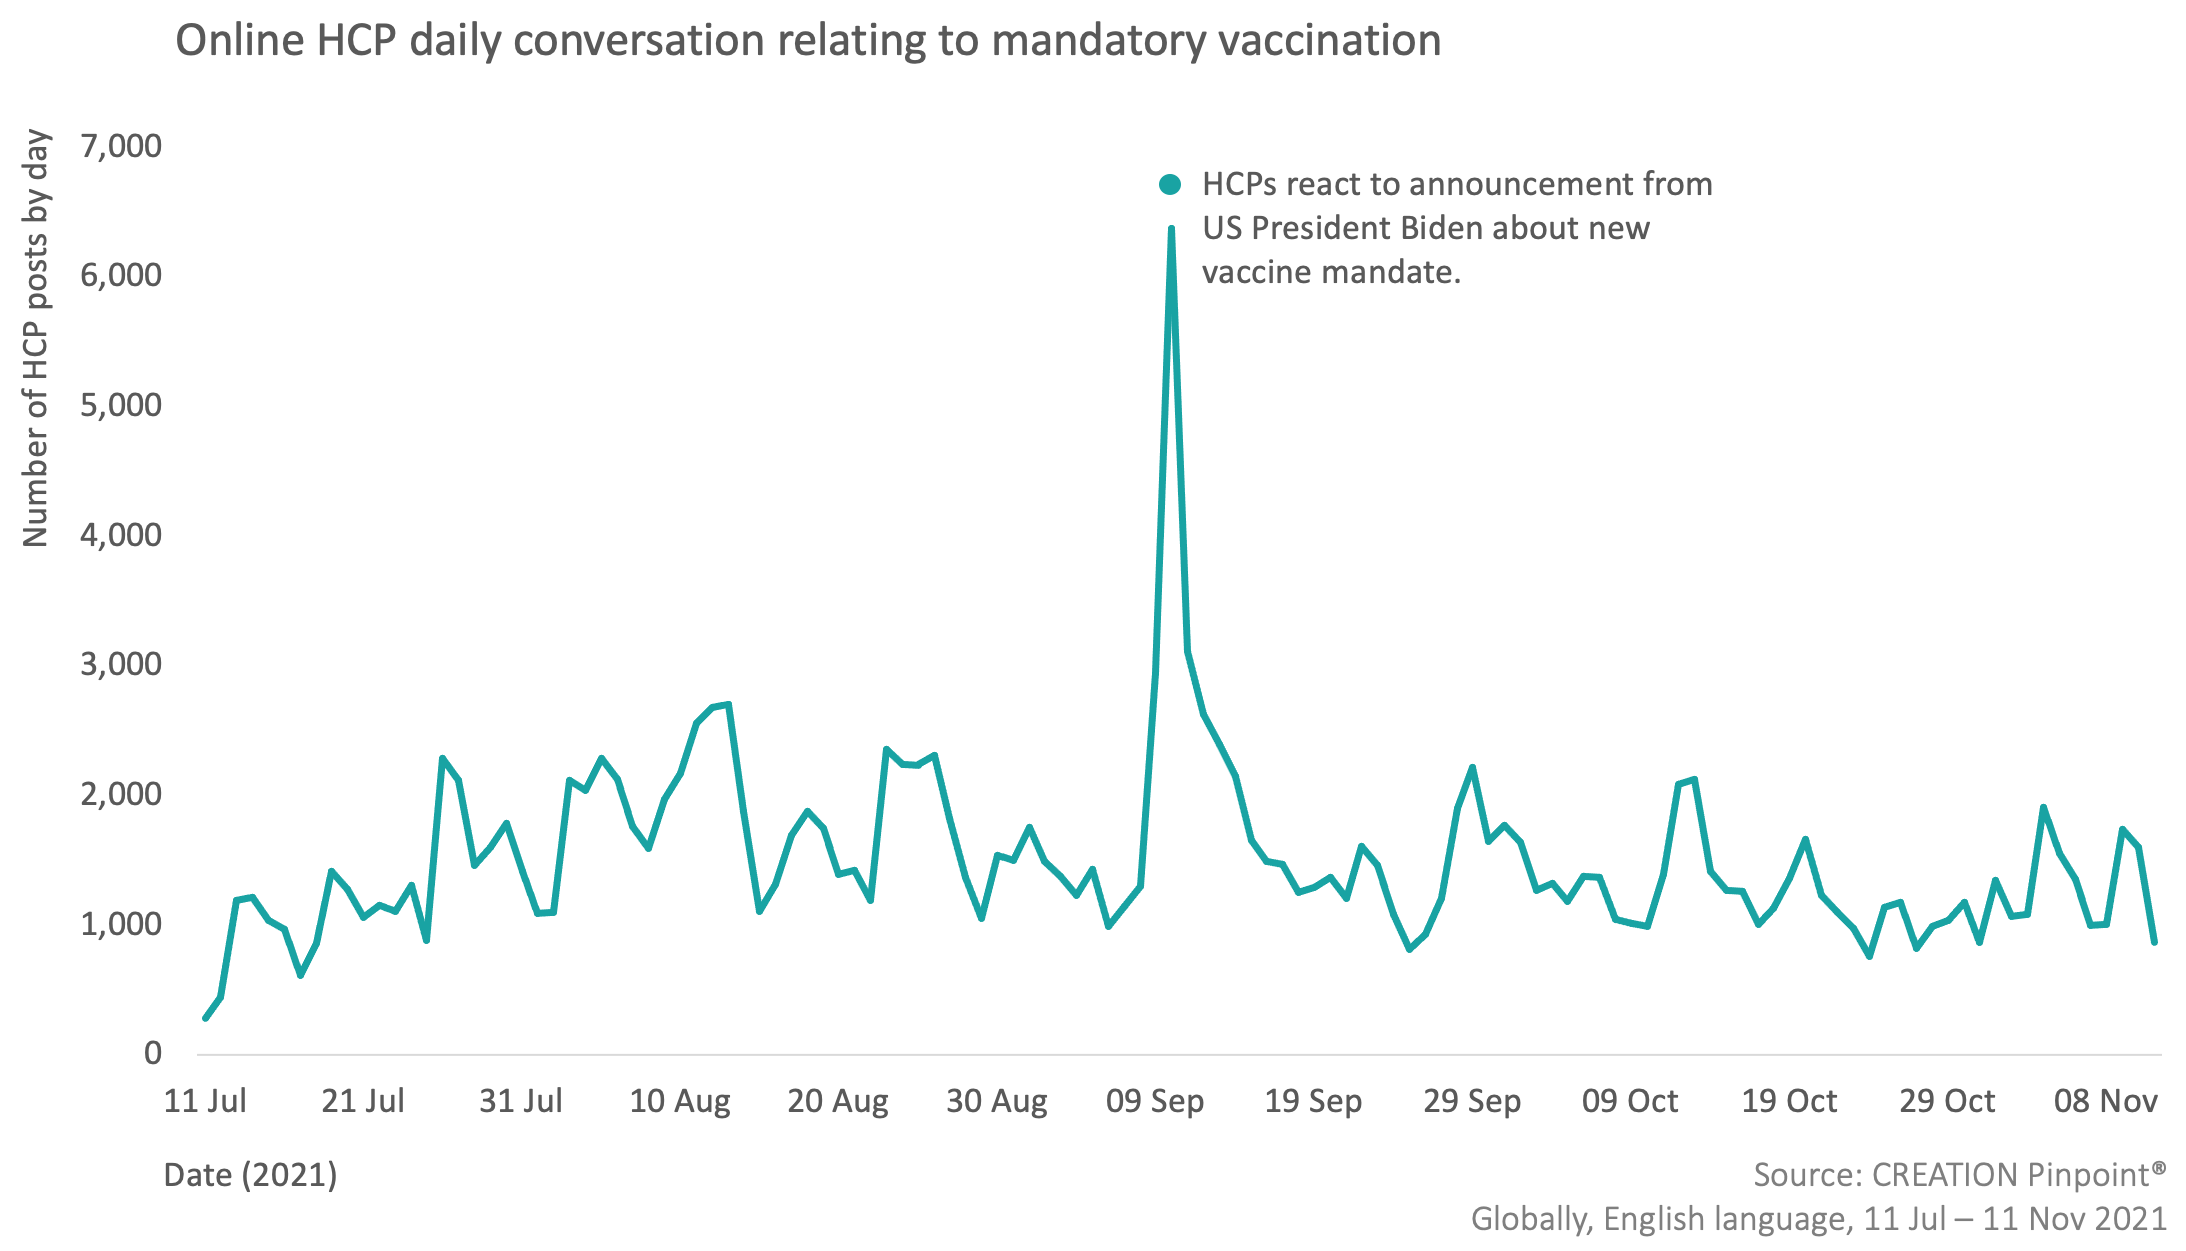 Graph showing online HCP daily conversation relating to mandatory vaccination